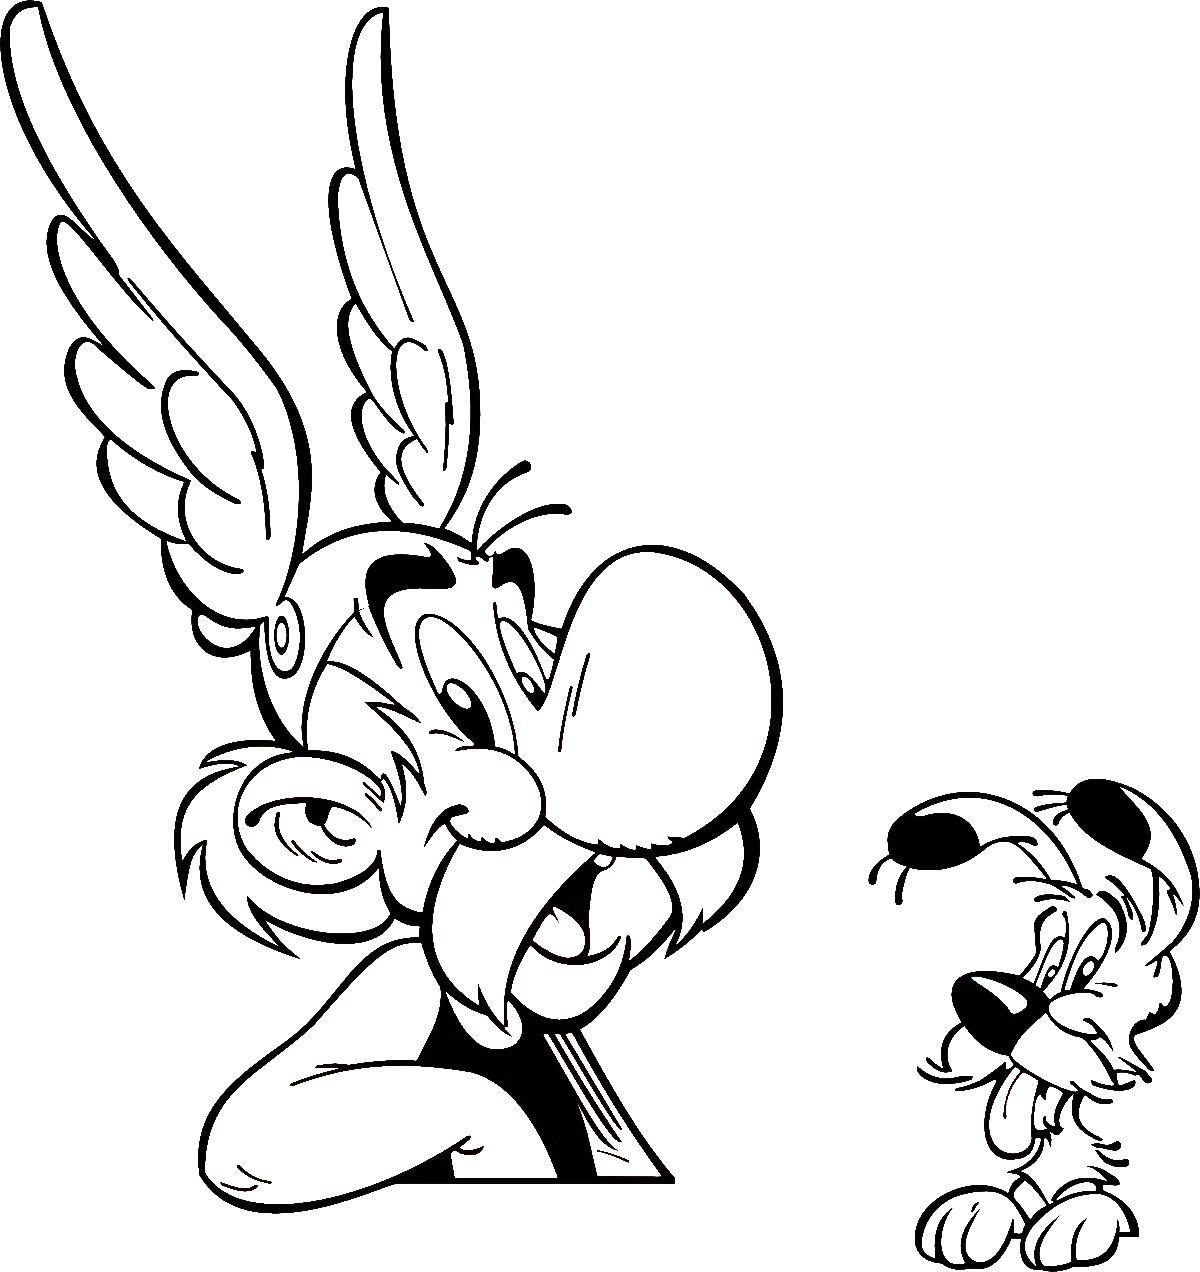 Asterix and Dogmatix picture to print and color